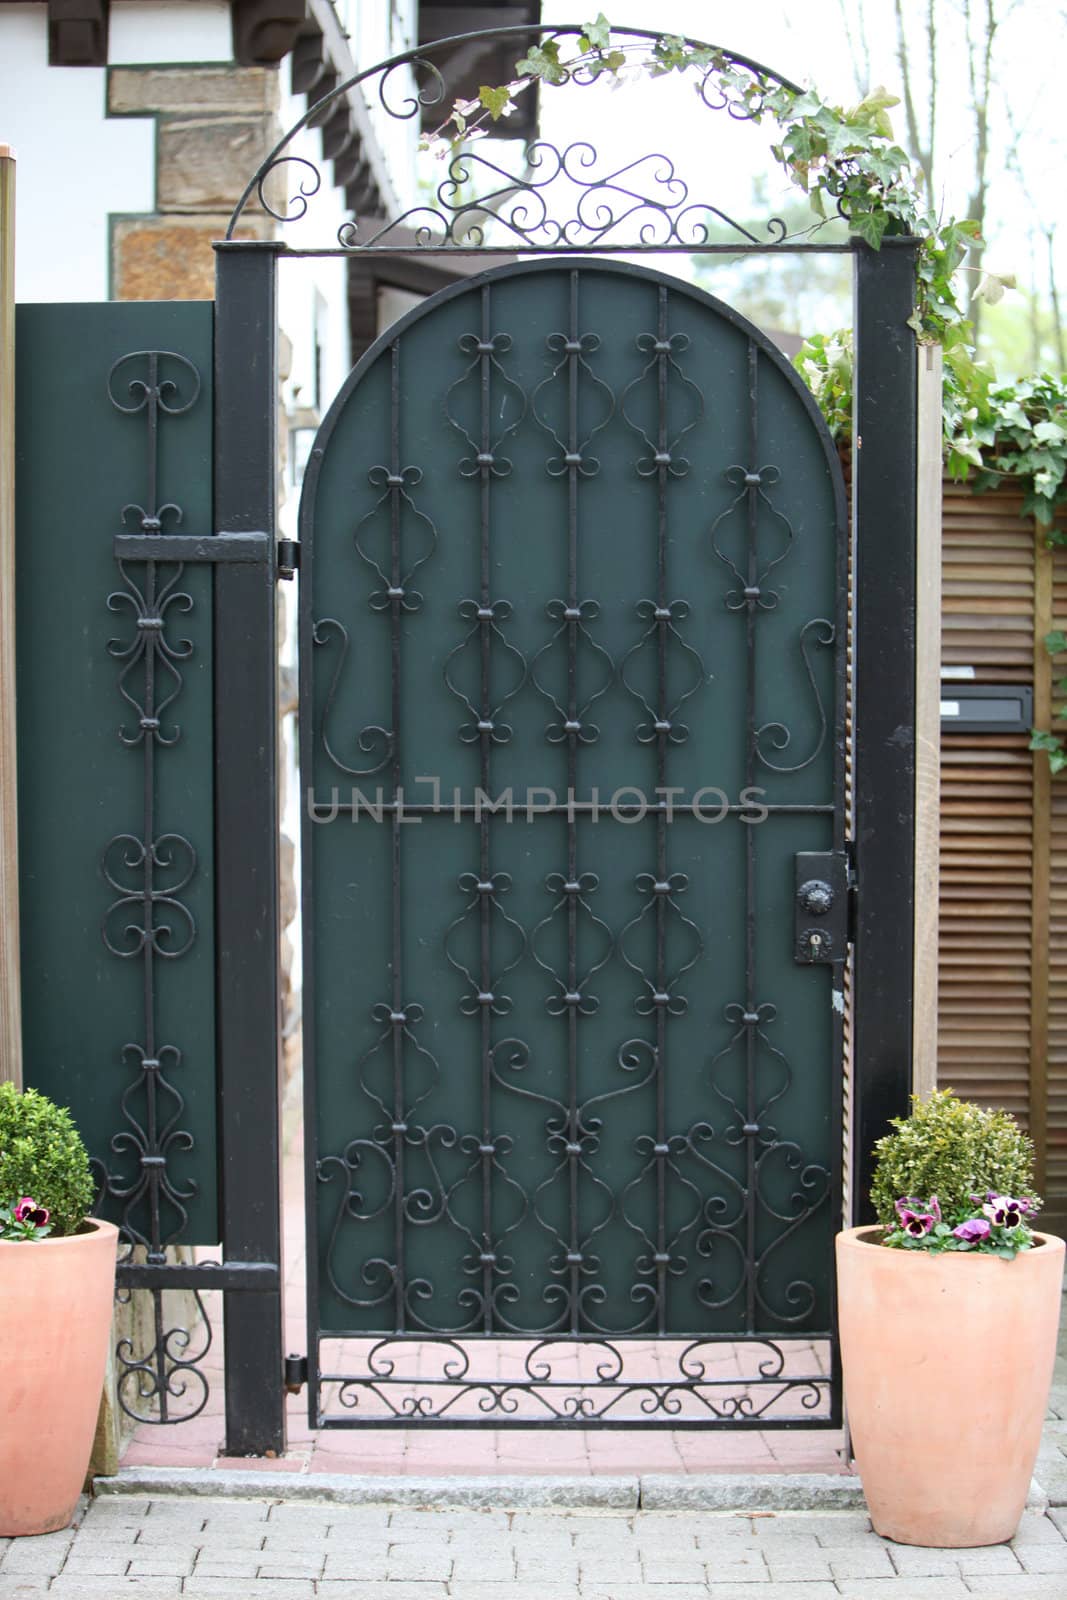 Ornate green metal entry gate by Farina6000